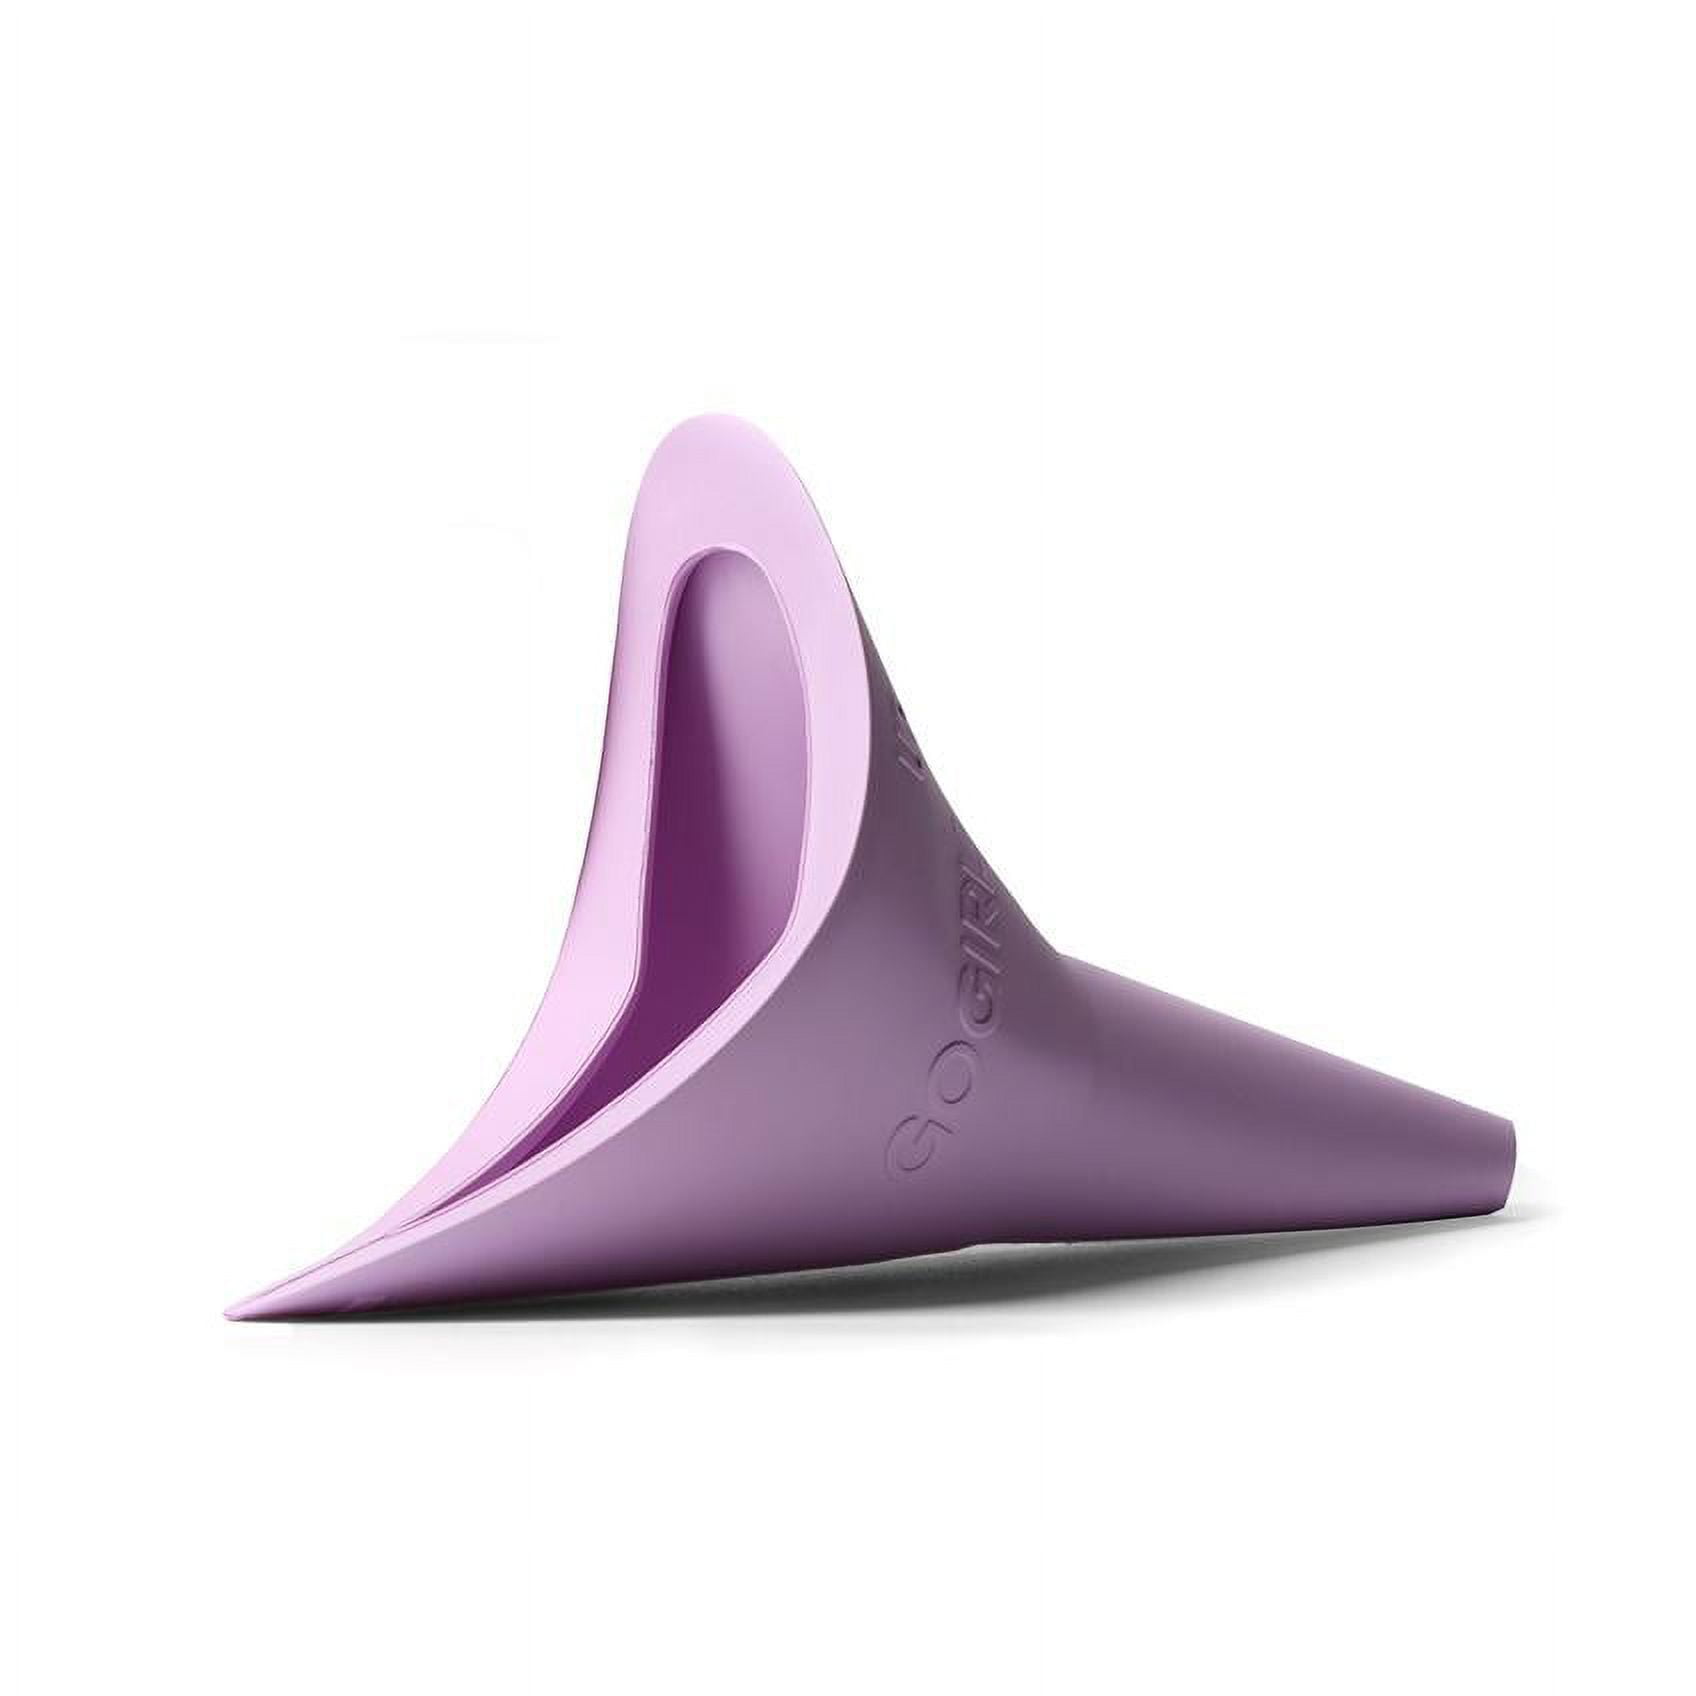  GoGirl Female Urination Device (FUD) - #1 FUD Made in The USA.  Pee Standing Up! Portable Female Urinal for Women, Soft, Flexible,  Reusable, Pee Funnel Medical-Grade Silicone (Pink) : Health 